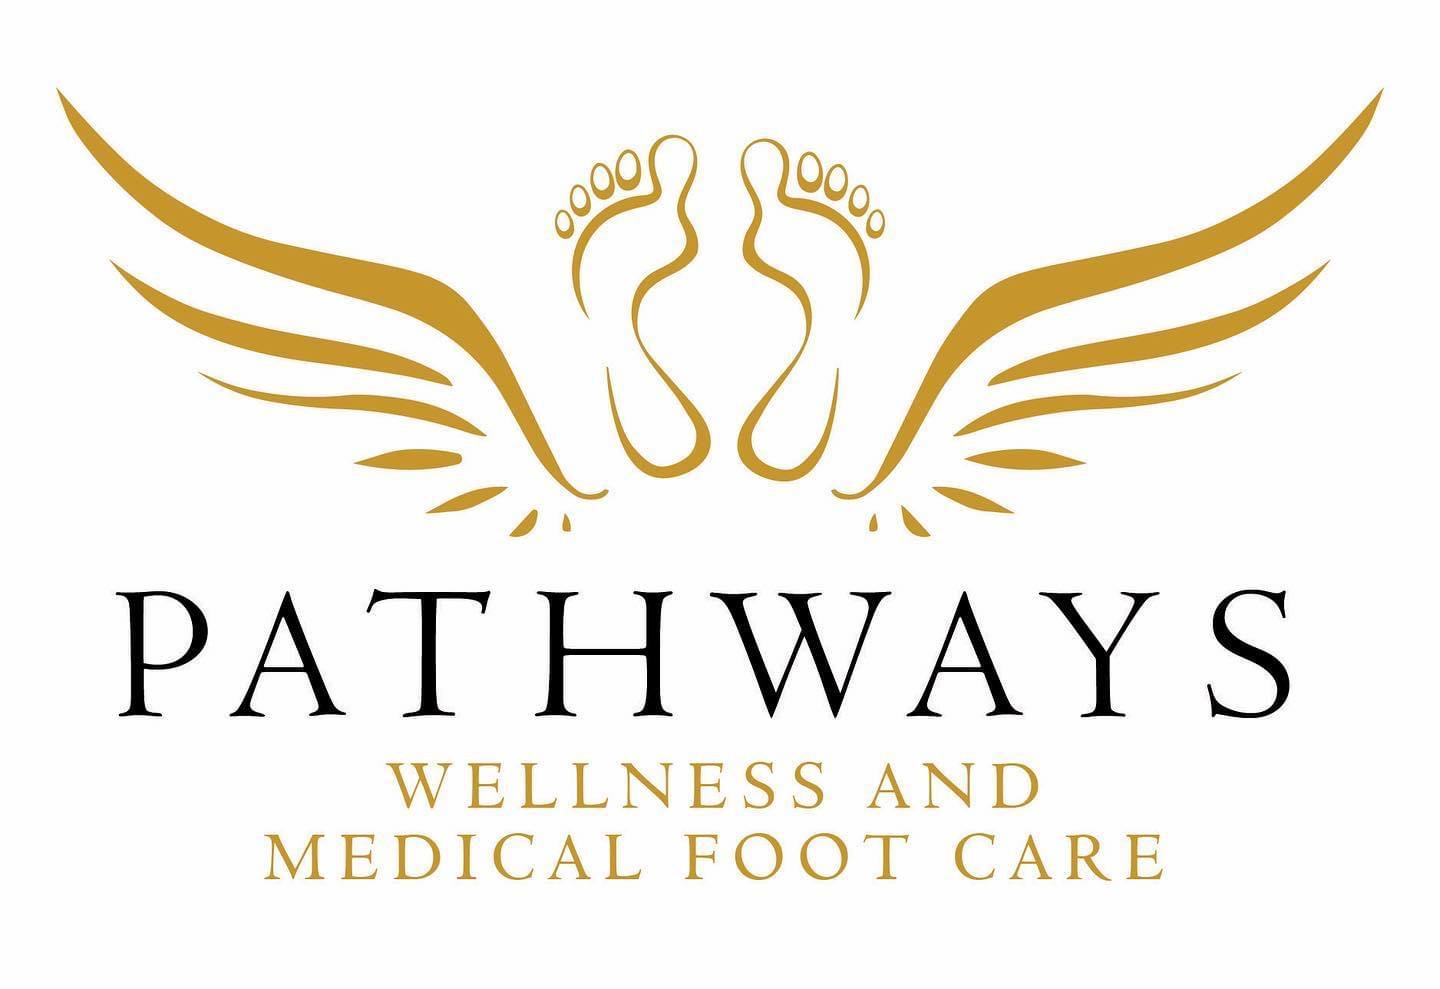 Pathways Wellness & Medical Foot Care